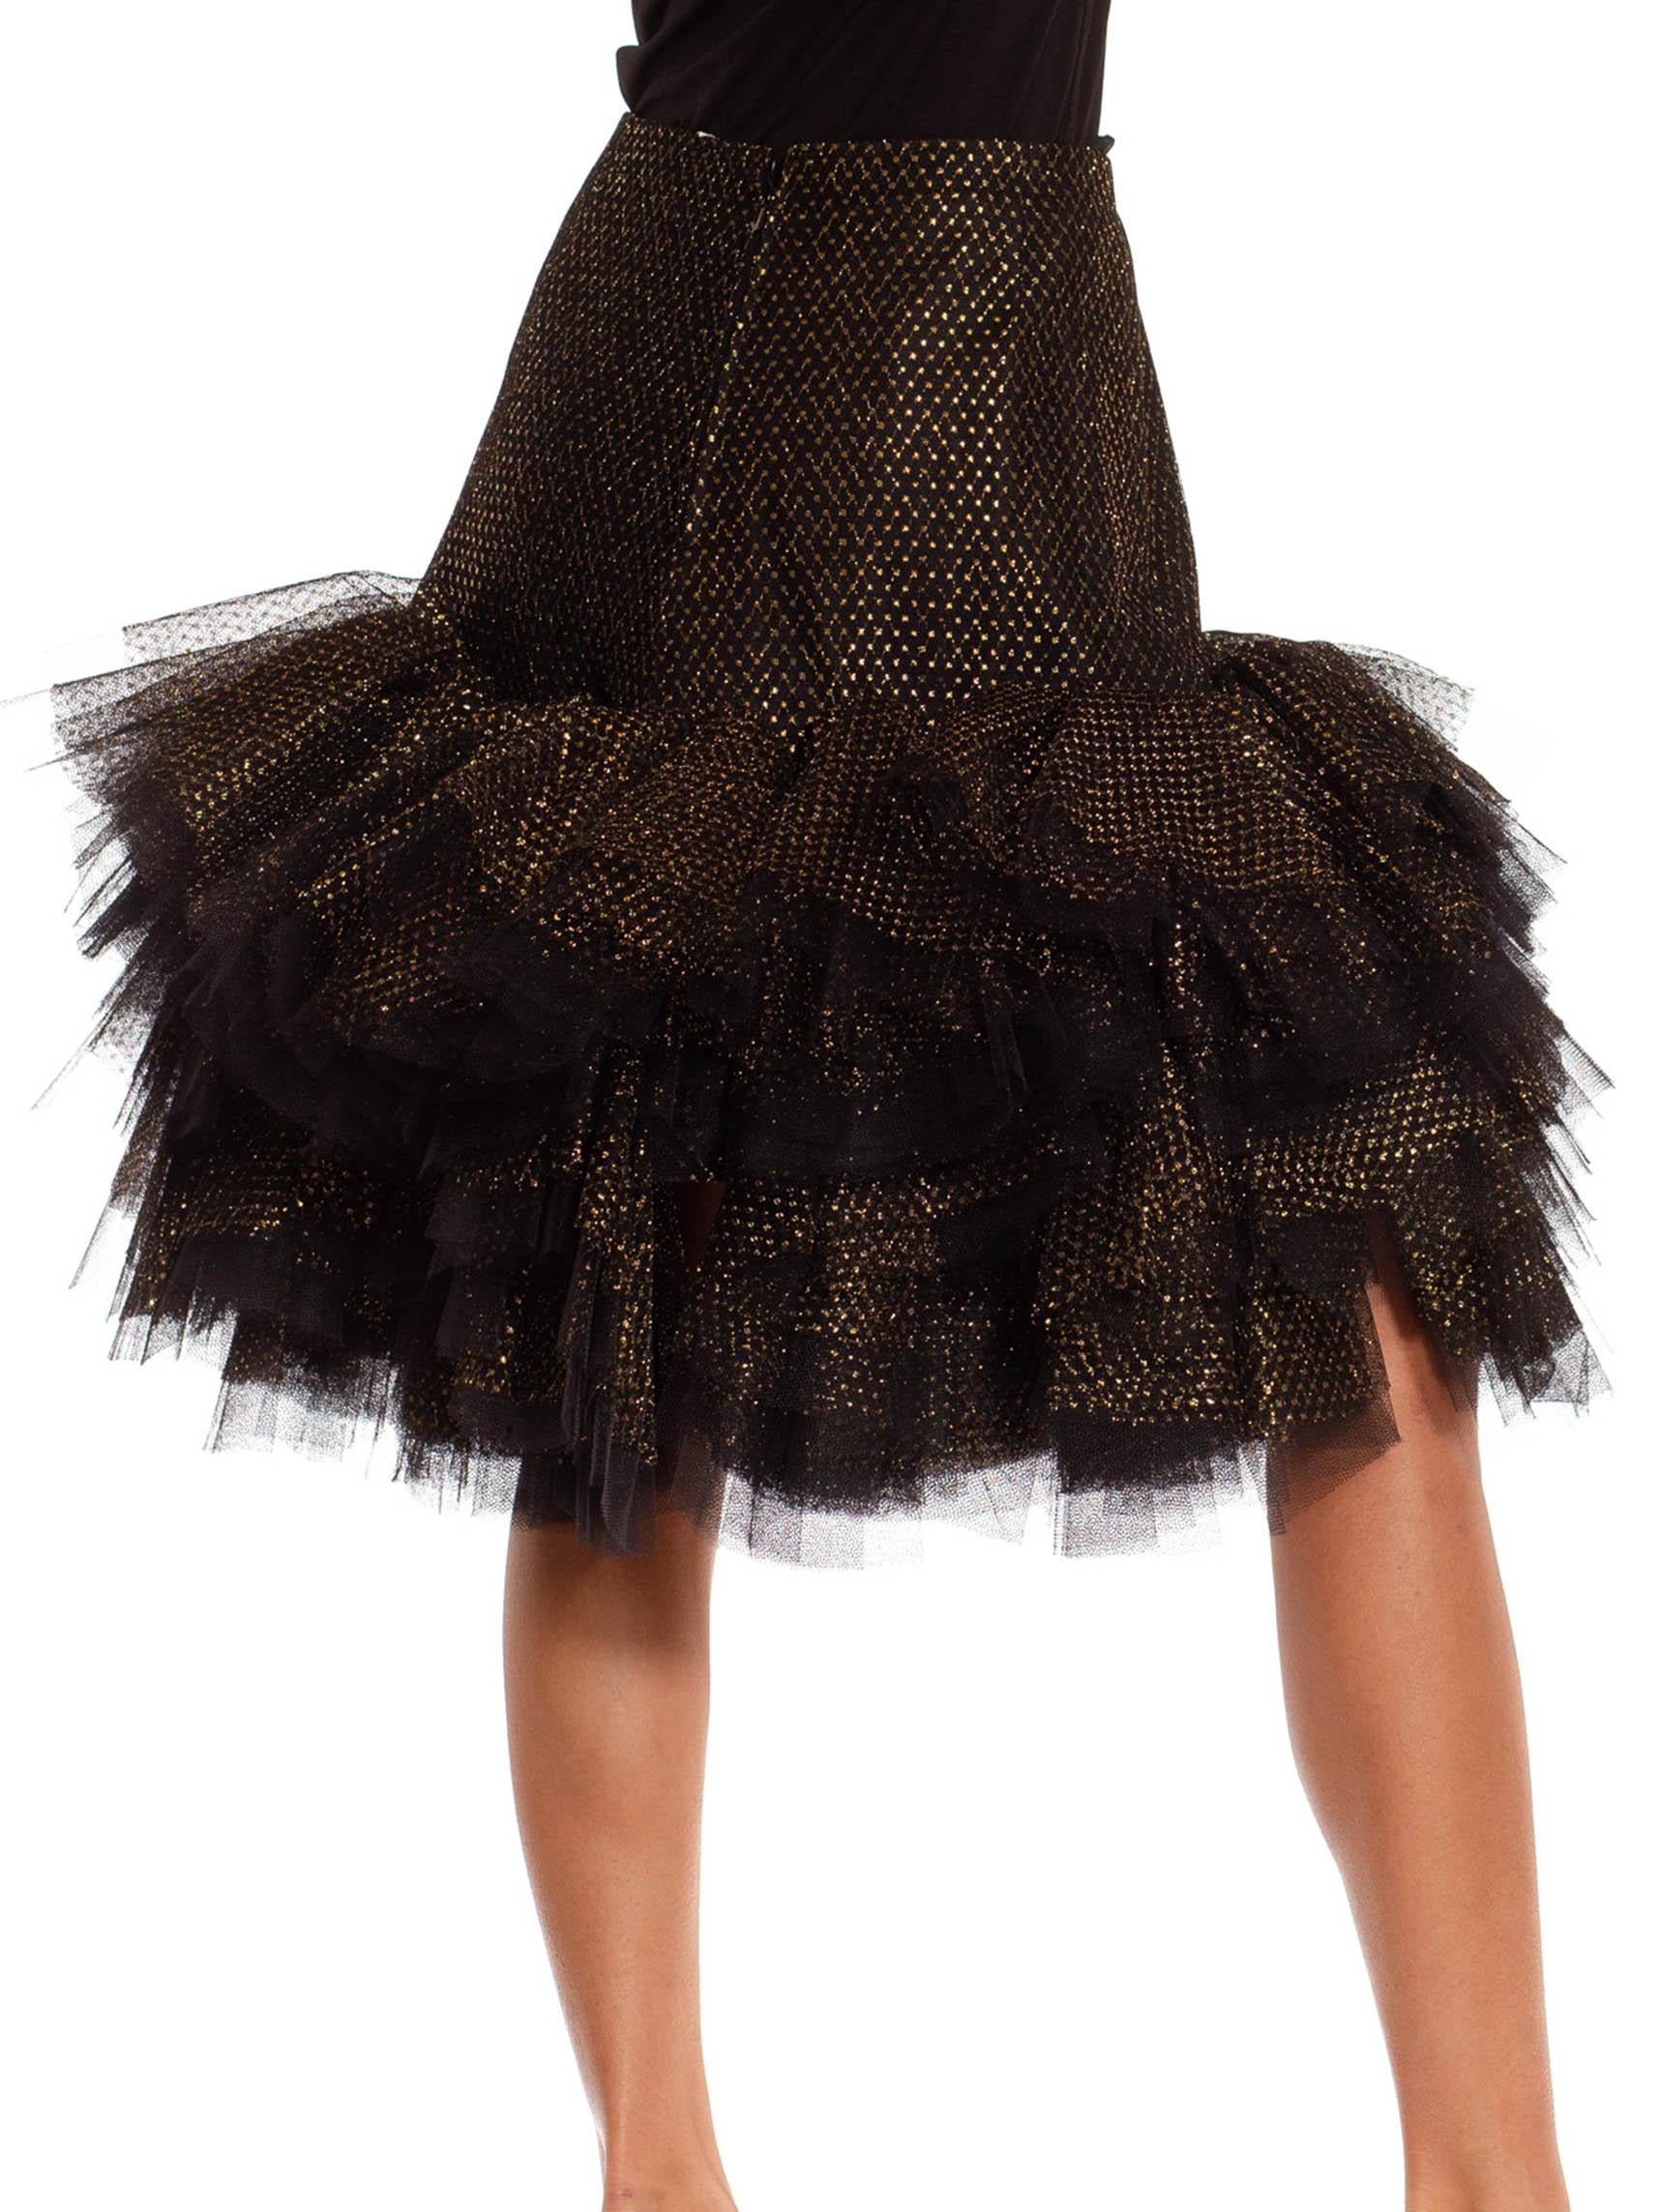 1980S Jacqueline De Ribes Black & Gold Tulle Tiered Polka Dot Skirt For Sale 6